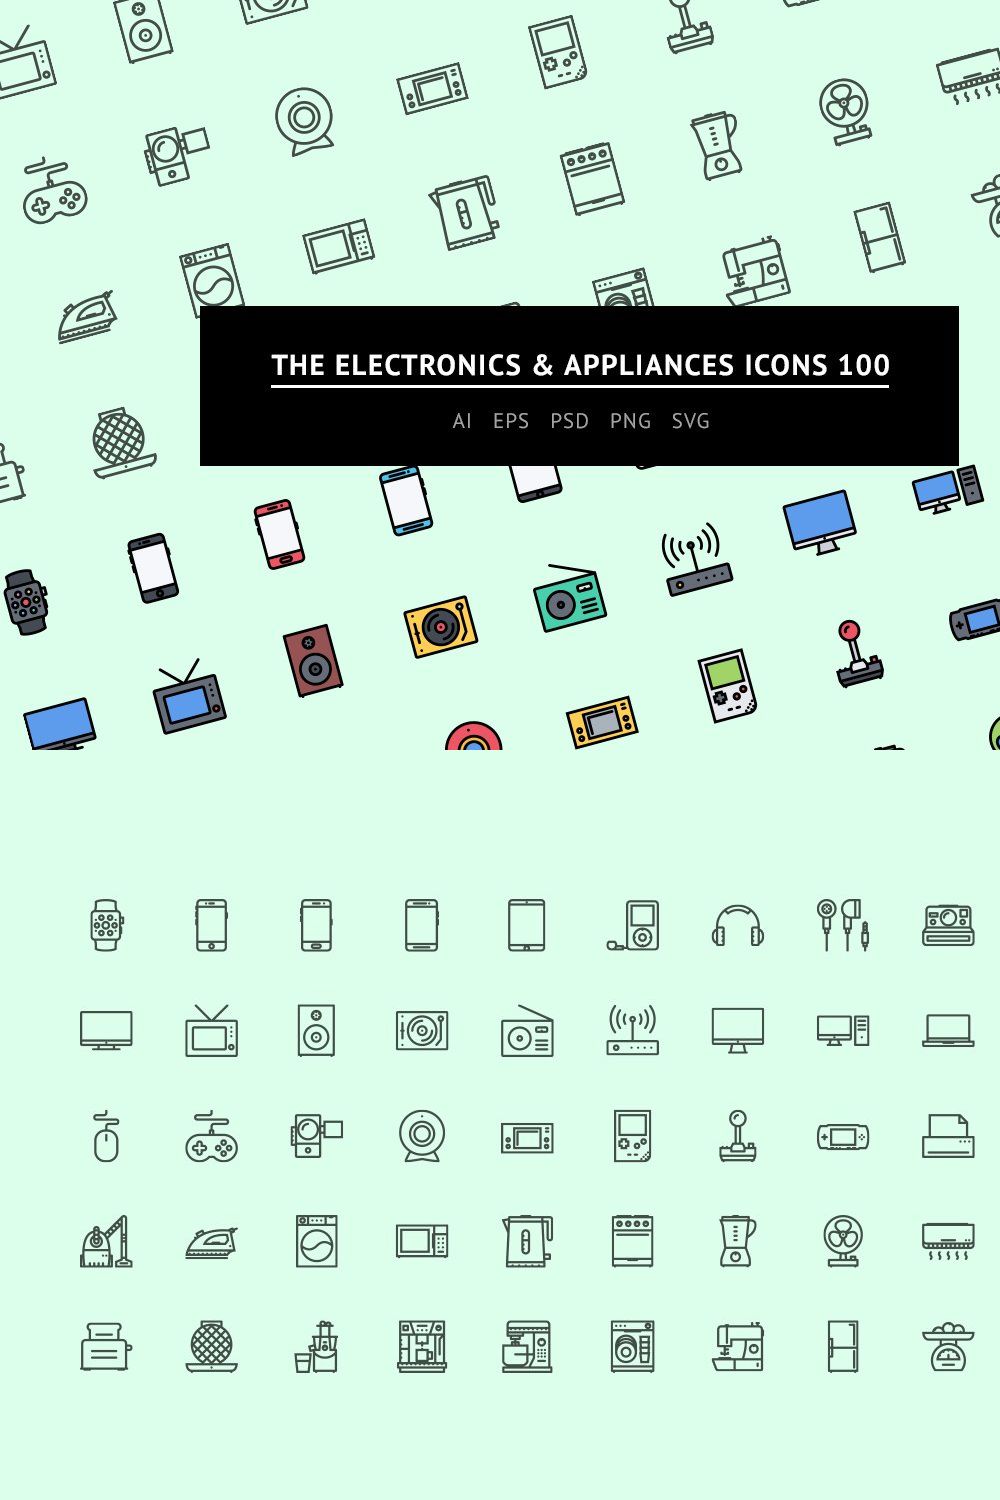 The Electronics&Appliances Icons 100 pinterest preview image.